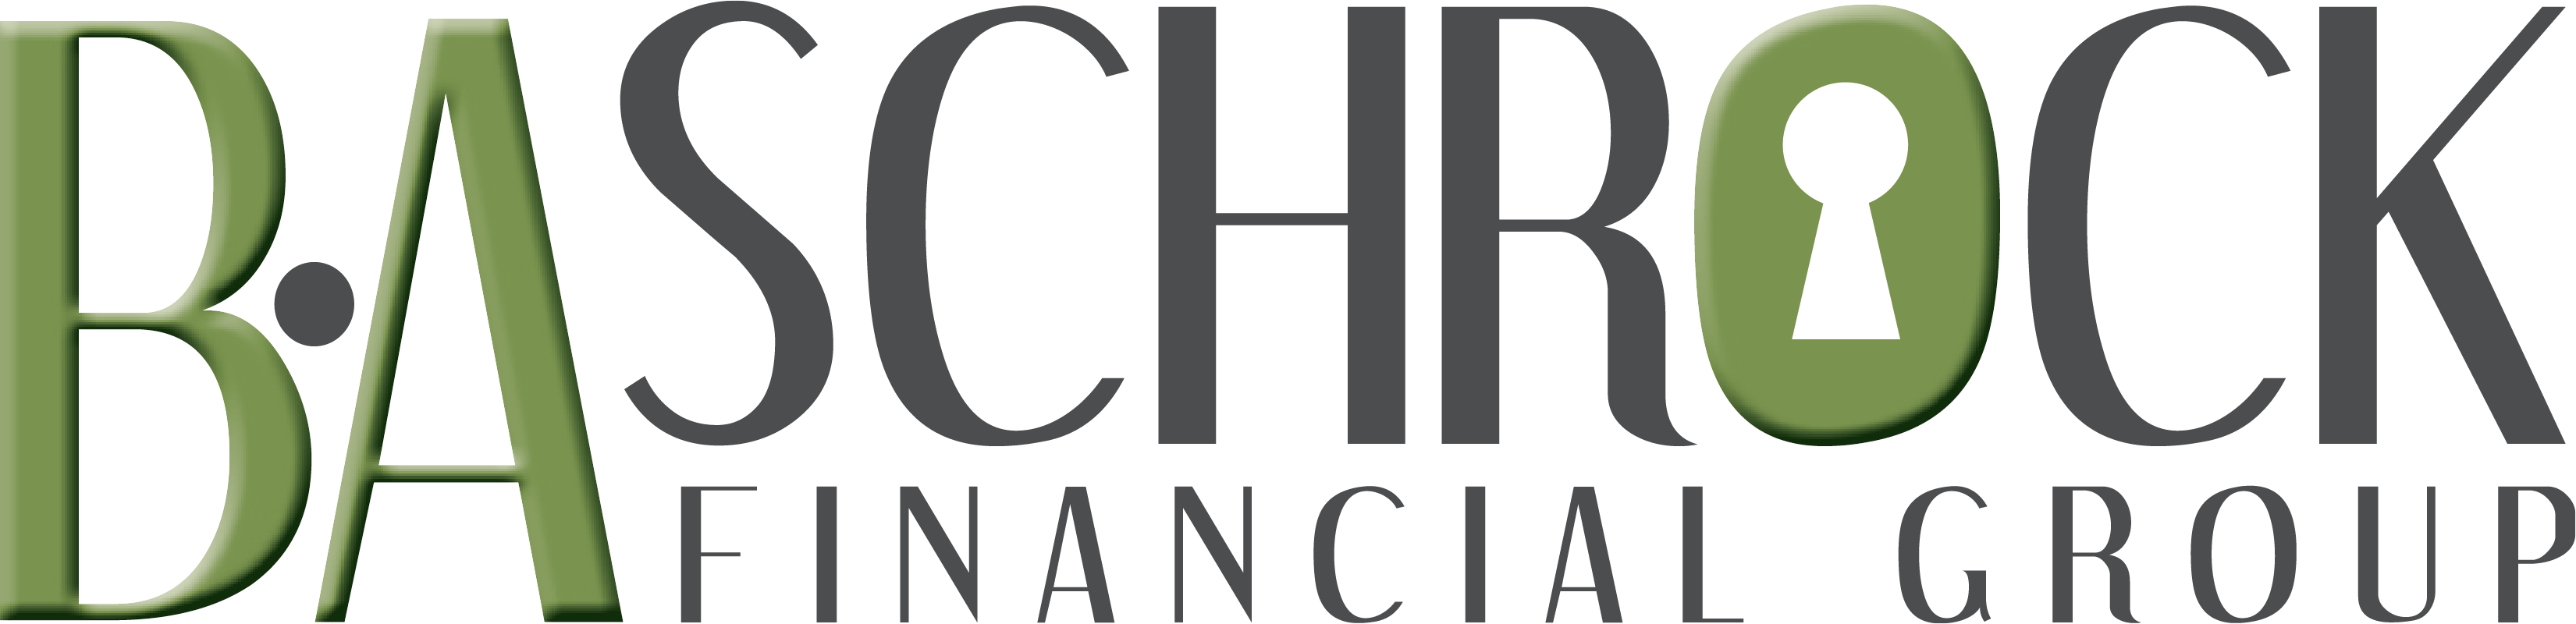 B.A. Schrock Financial Group | Ep 104: What is the Certified Financial Planner Designation?